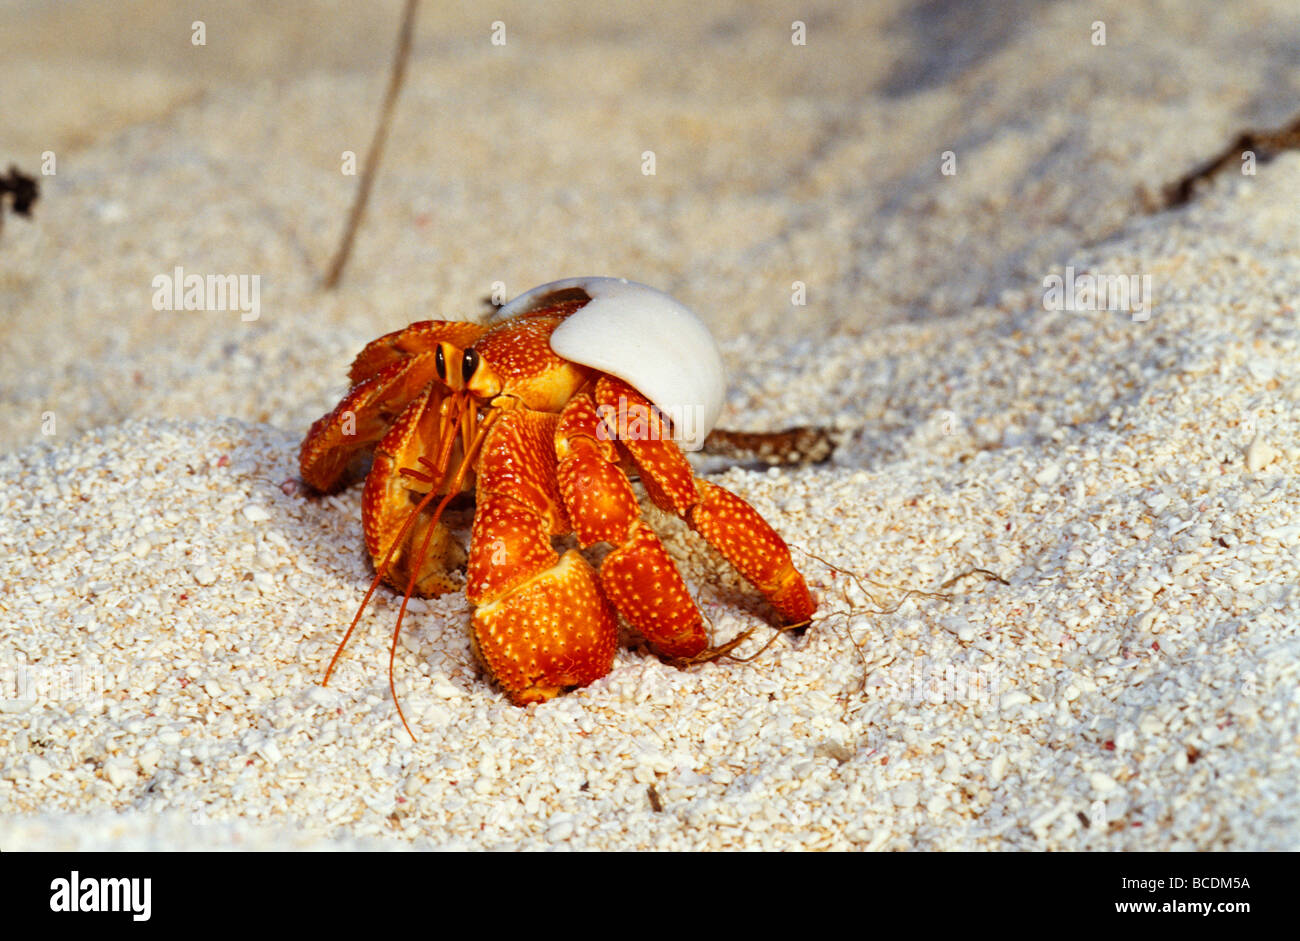 A Strawberry Land Hermit Crab emerging from its shell on a sand beach. Stock Photo